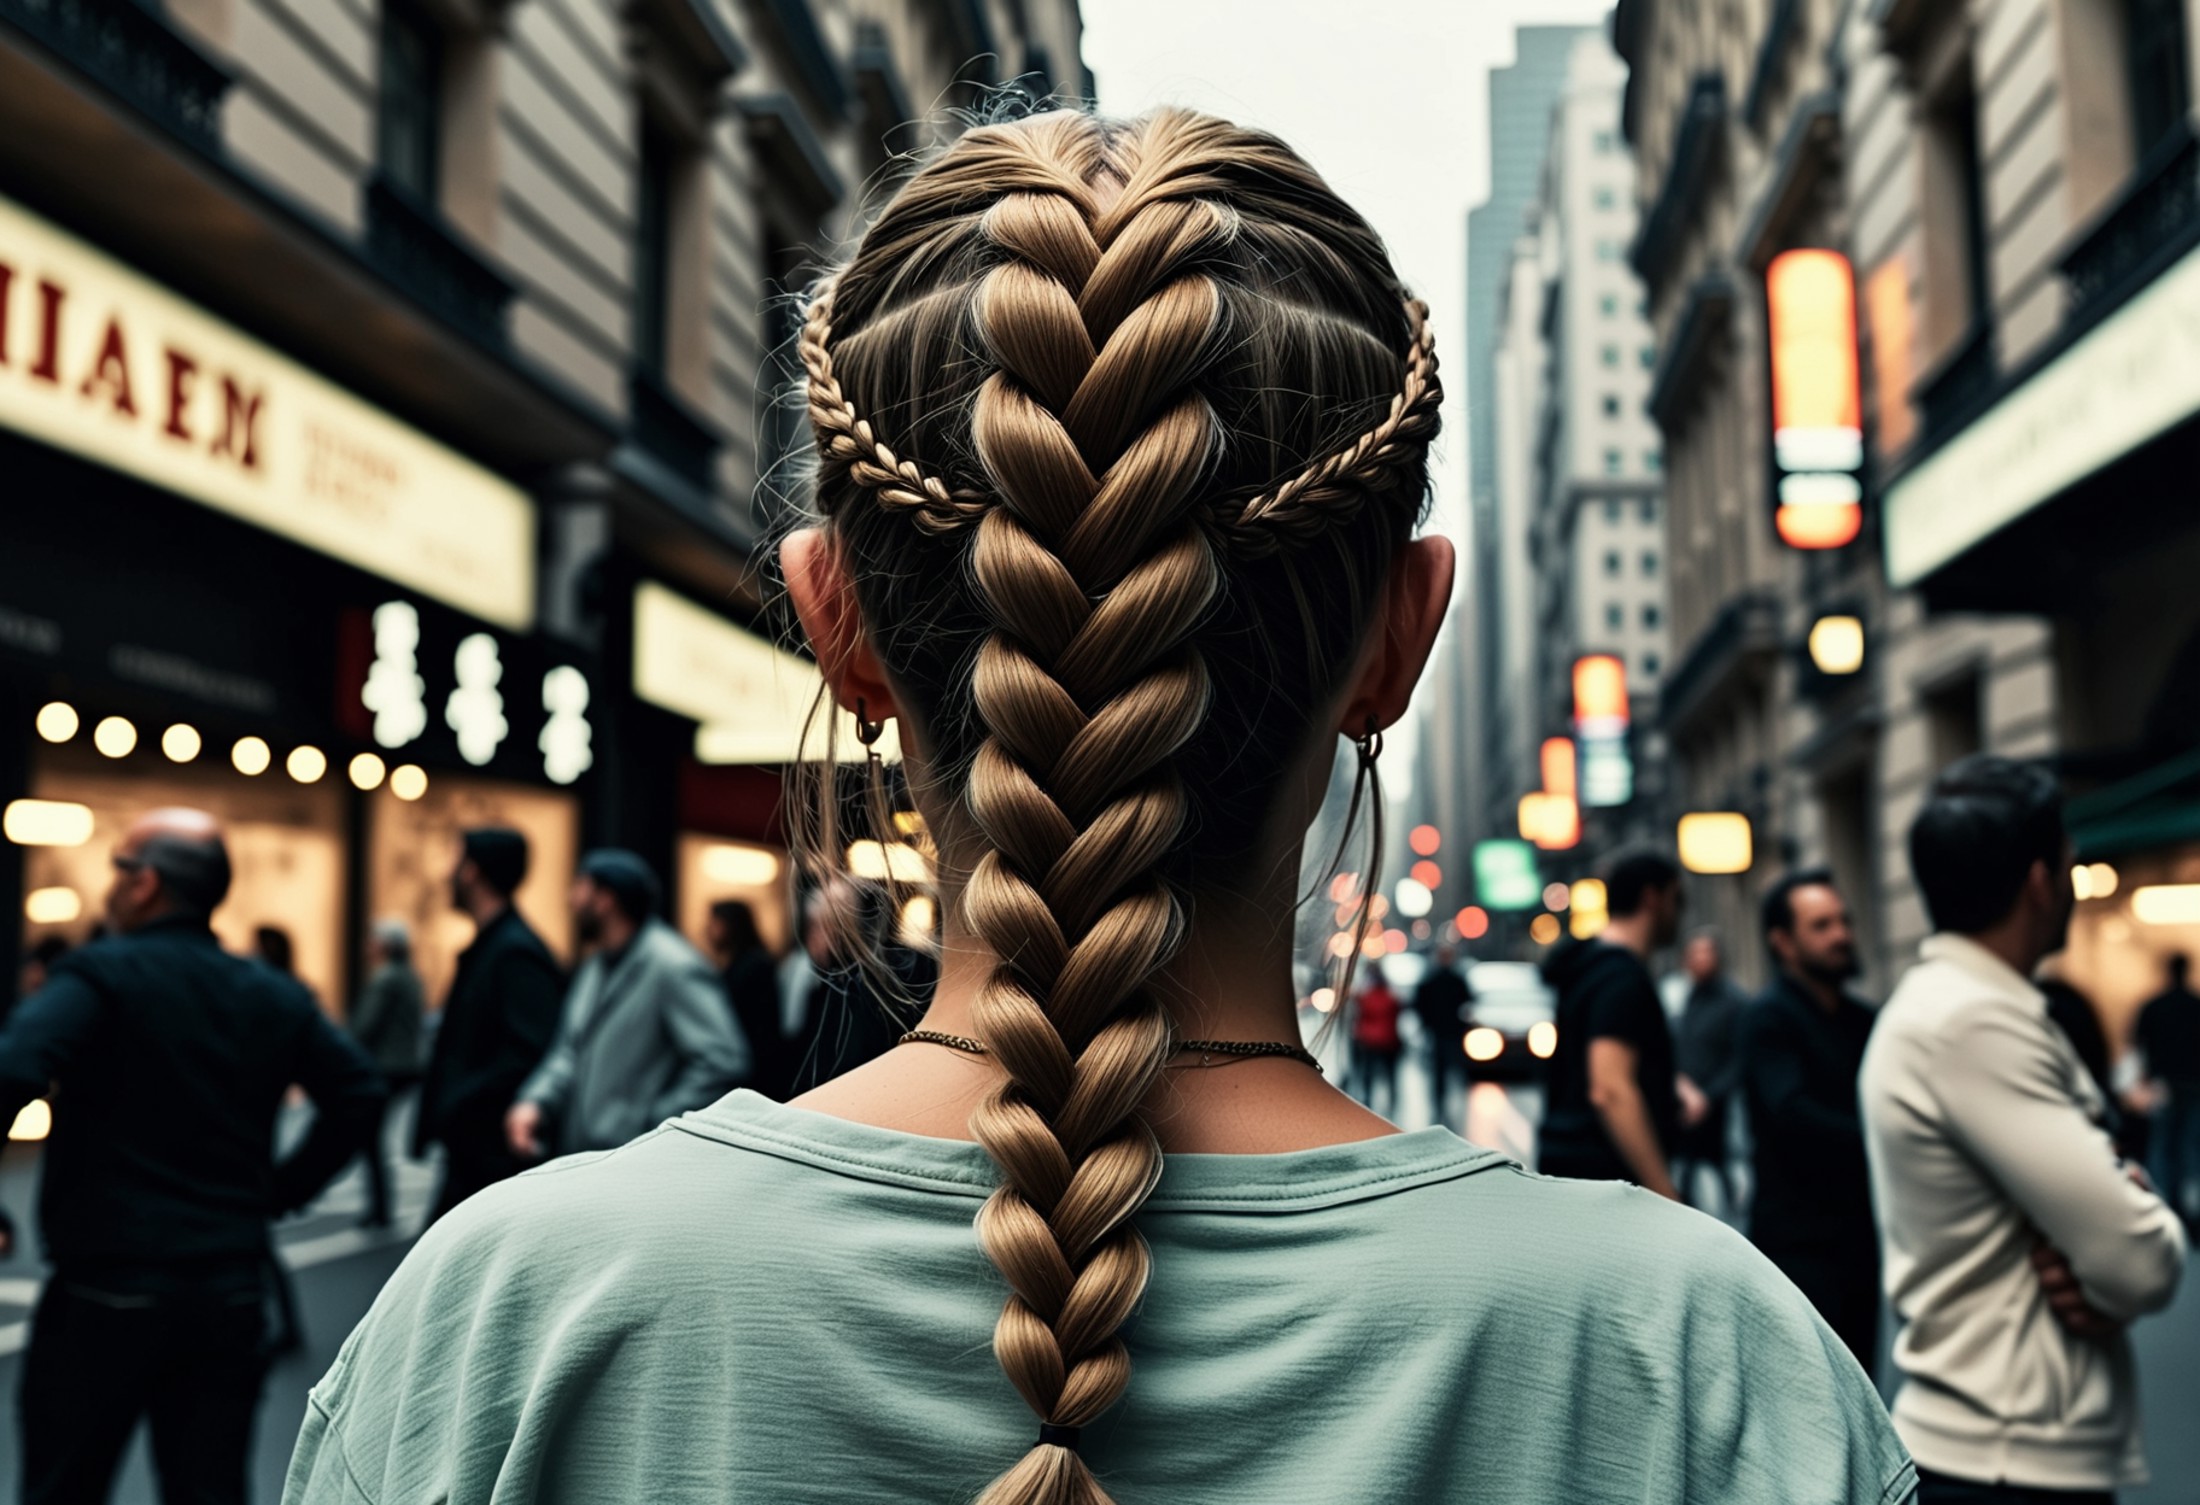 tilt shift of In a vibrant and surreal scene, Gunner's hair is painted in the style of French braids that dance and twist ...